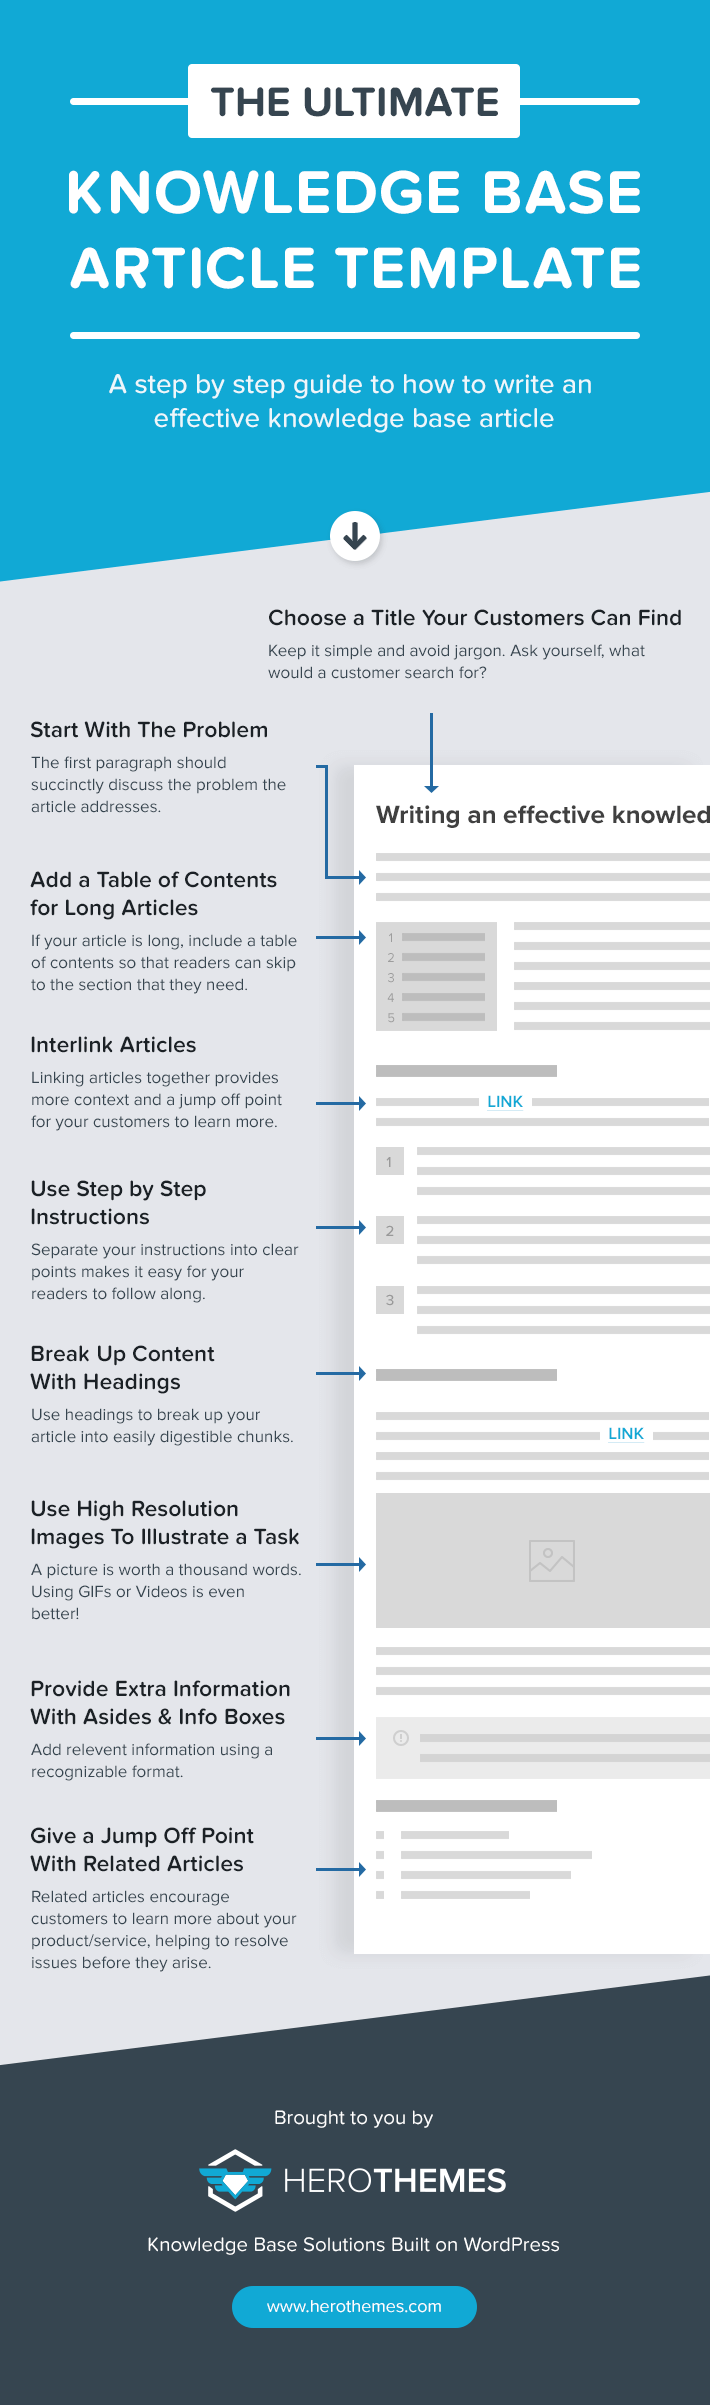 Knowledge Base Article Template Infographic